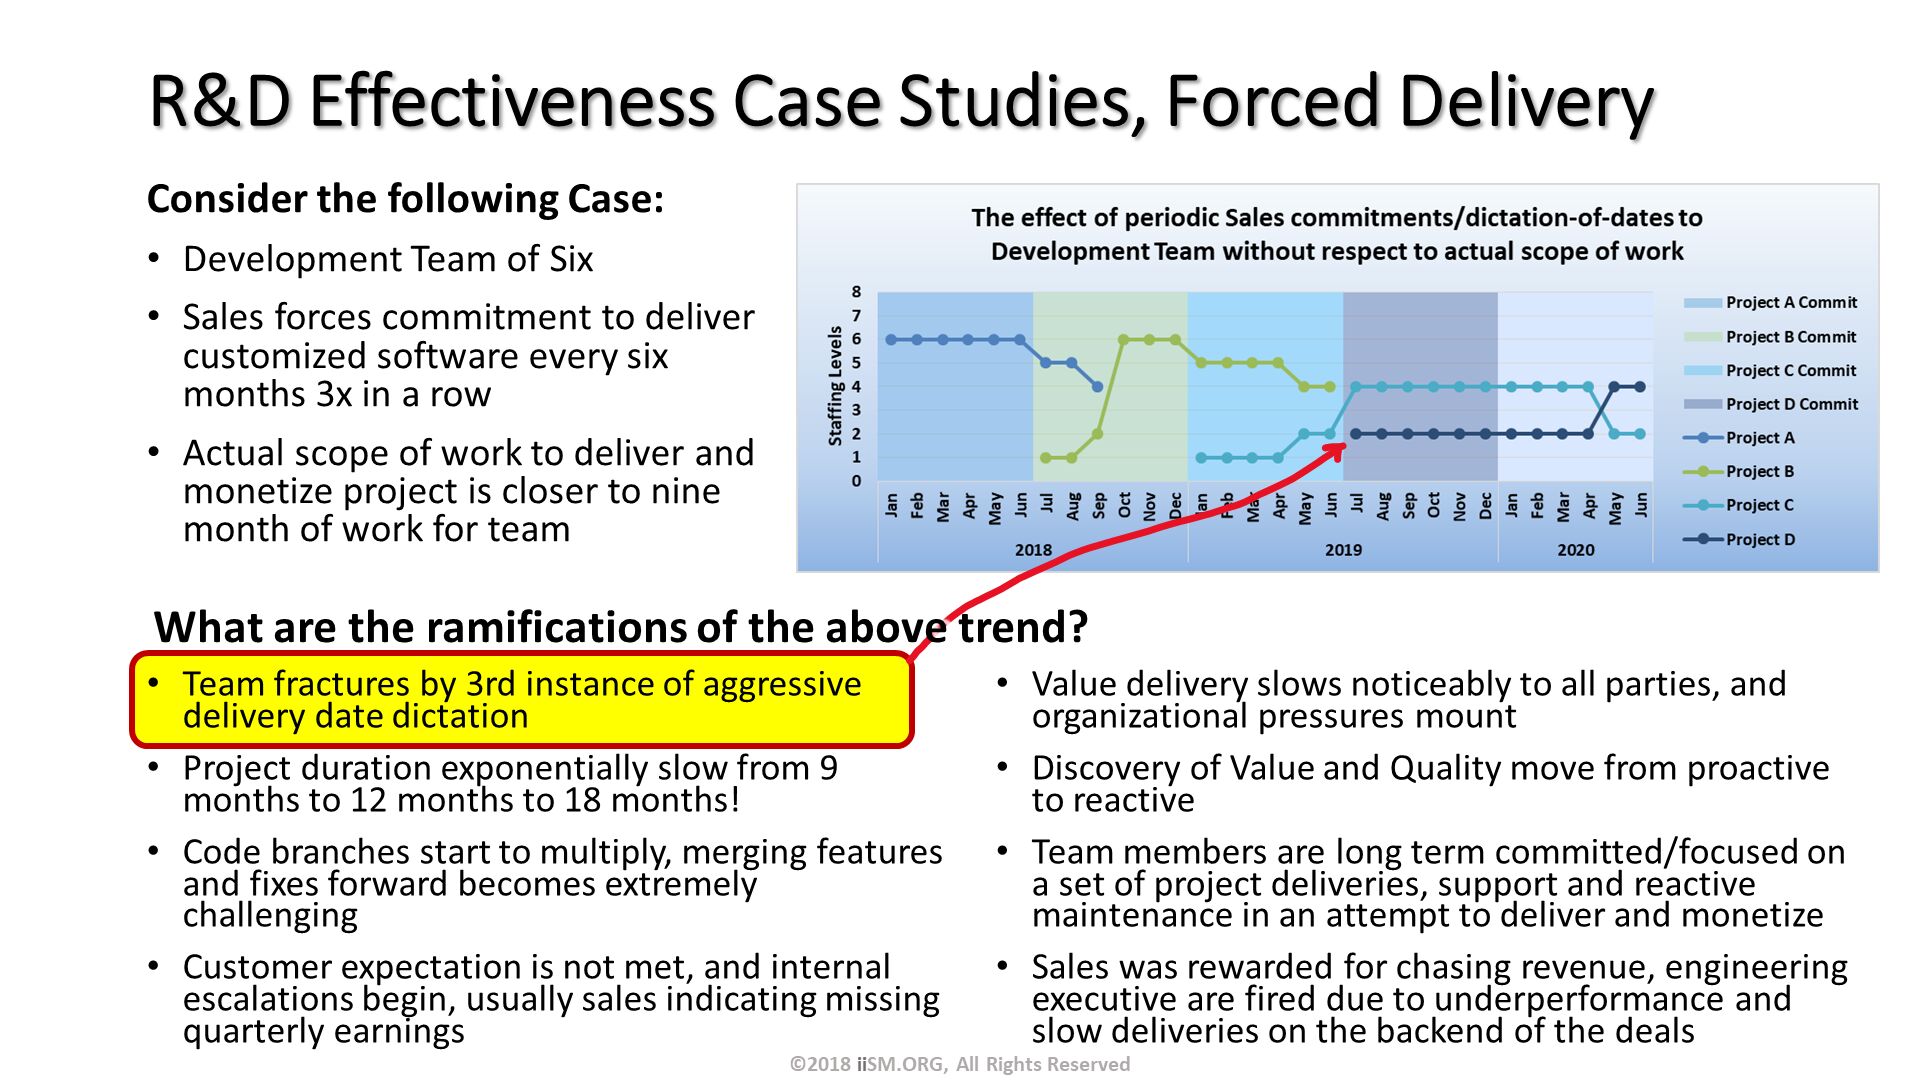 R&D Effectiveness Case Studies, Forced Delivery. Consider the following Case:
Development Team of Six
Sales forces commitment to deliver customized software every six months 3x in a row
Actual scope of work to deliver and monetize project is closer to nine month of work for team. Team fractures by 3rd instance of aggressive delivery date dictation
Project duration exponentially slow from 9 months to 12 months to 18 months!
Code branches start to multiply, merging features and fixes forward becomes extremely challenging
Customer expectation is not met, and internal escalations begin, usually sales indicating missing quarterly earnings
. Value delivery slows noticeably to all parties, and organizational pressures mount
Discovery of Value and Quality move from proactive to reactive
Team members are long term committed/focused on a set of project deliveries, support and reactive maintenance in an attempt to deliver and monetize
Sales was rewarded for chasing revenue, engineering executive are fired due to underperformance and slow deliveries on the backend of the deals. ©2018 iiSM.ORG, All Rights Reserved. What are the ramifications of the above trend?. 